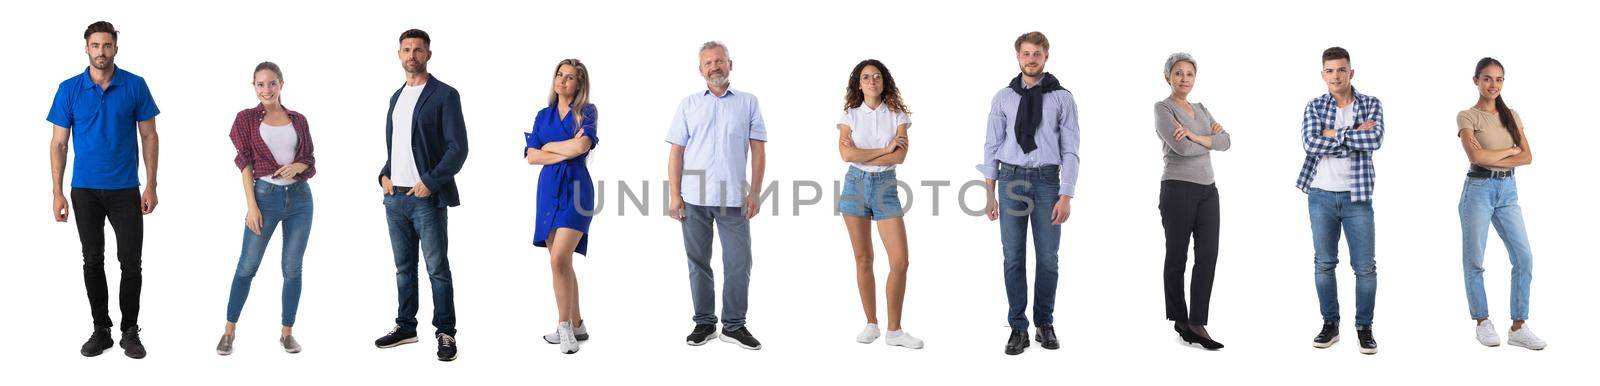 Full length portrait of people by ALotOfPeople